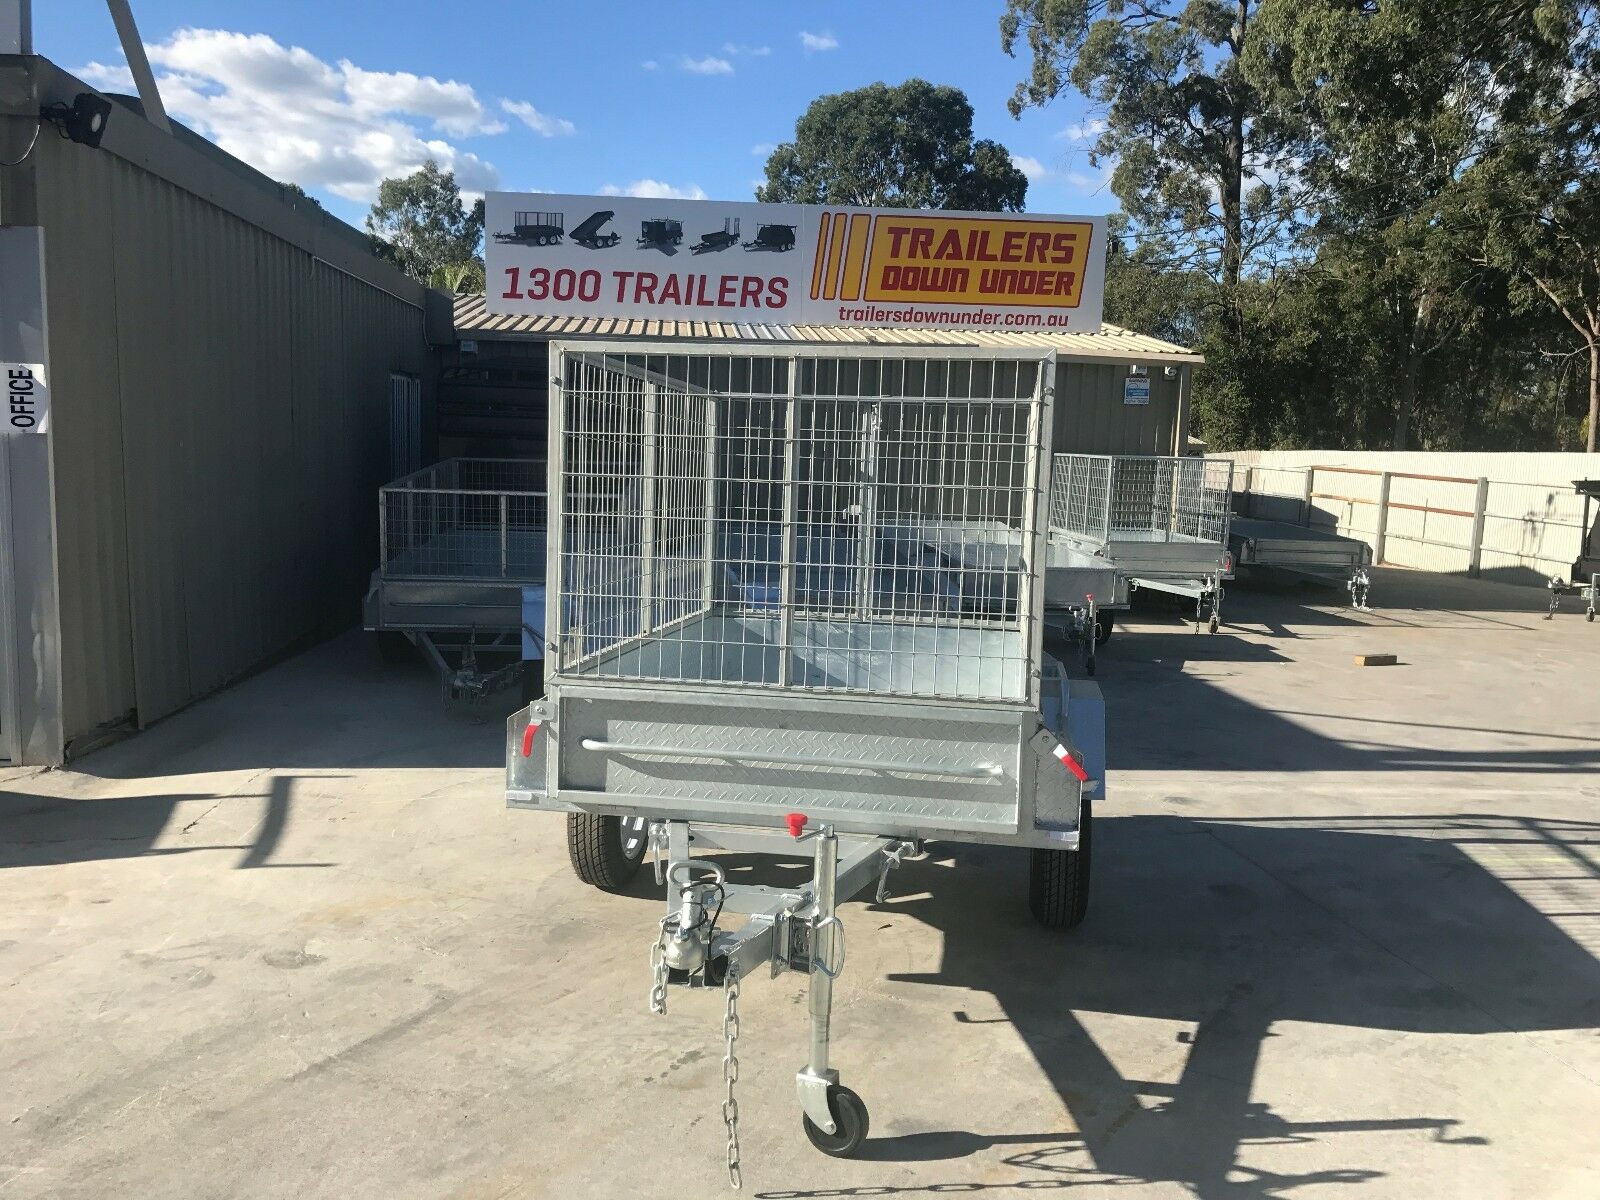 6×4 Galvanised Box Trailer with 2 Ft Cage for Sale in Brisbane